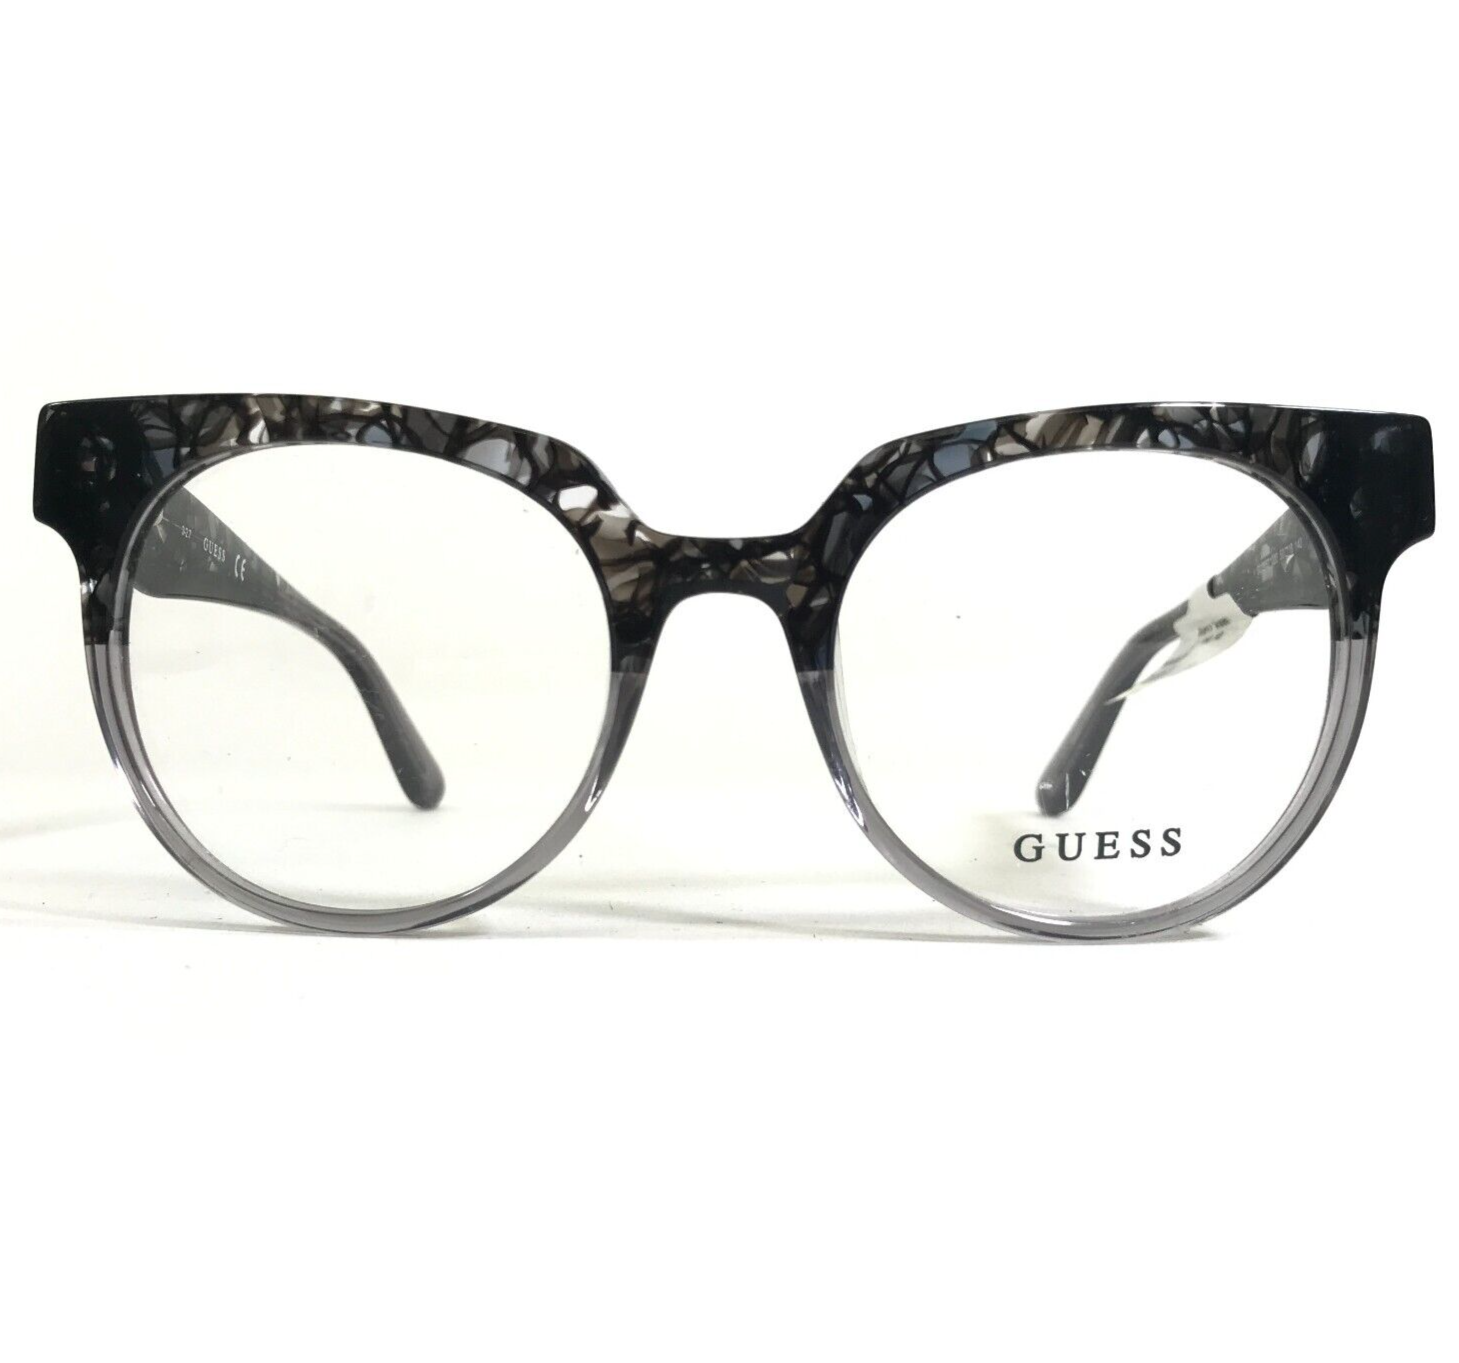 Primary image for Guess Eyeglasses Frames GU2652 020 Black Gray Clear Round Full Rim 50-18-140